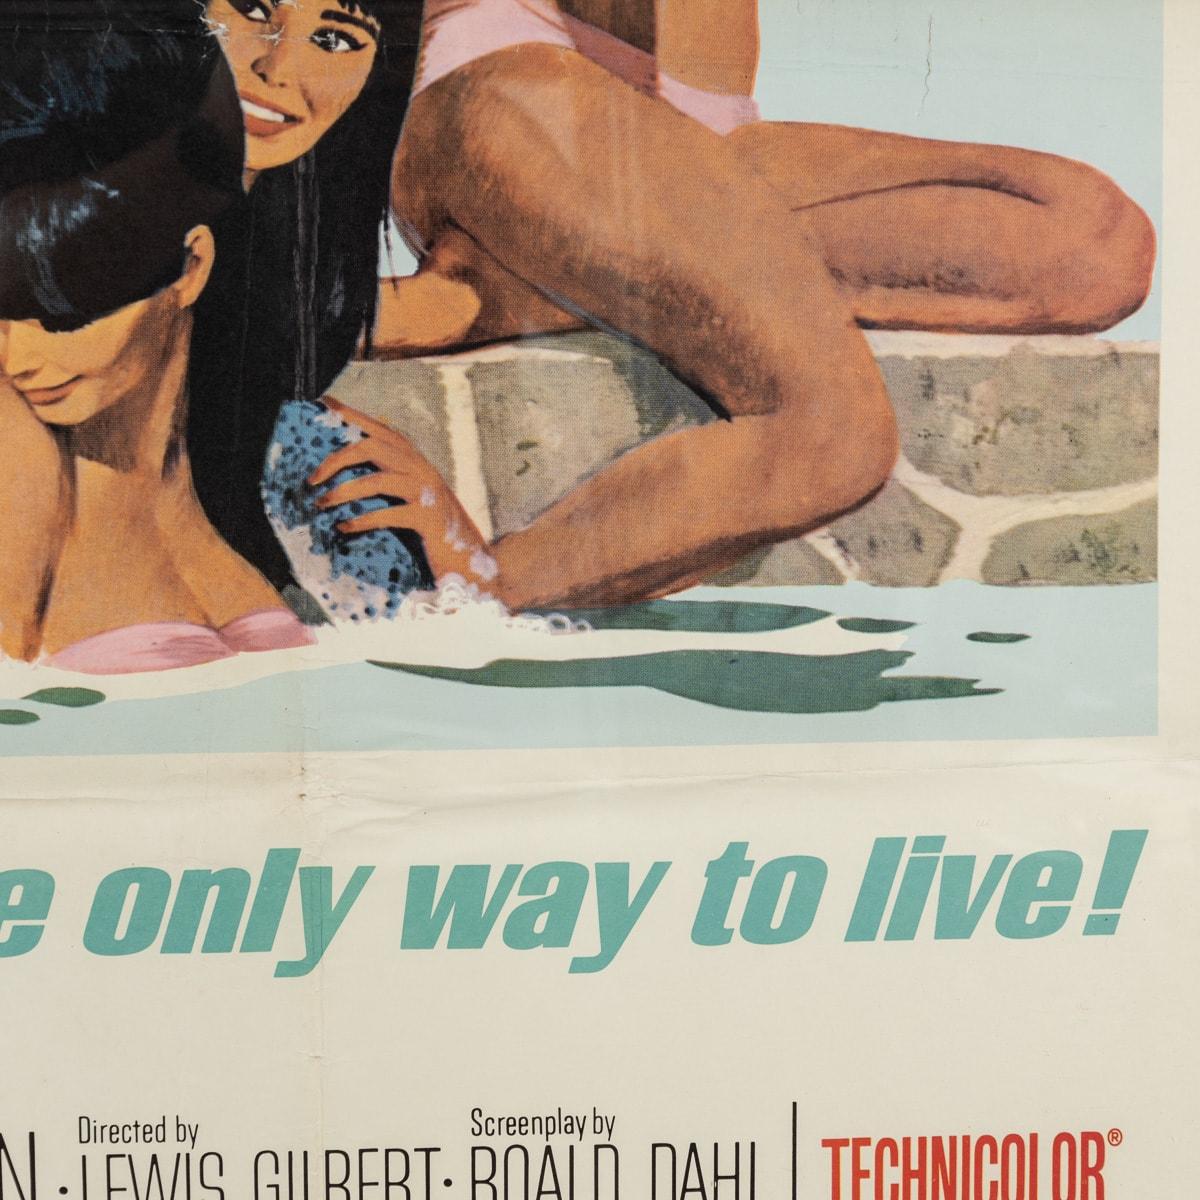 Original U.S Release James Bond 007 'You Only Live Twice' Subway C Poster c.1967 For Sale 8